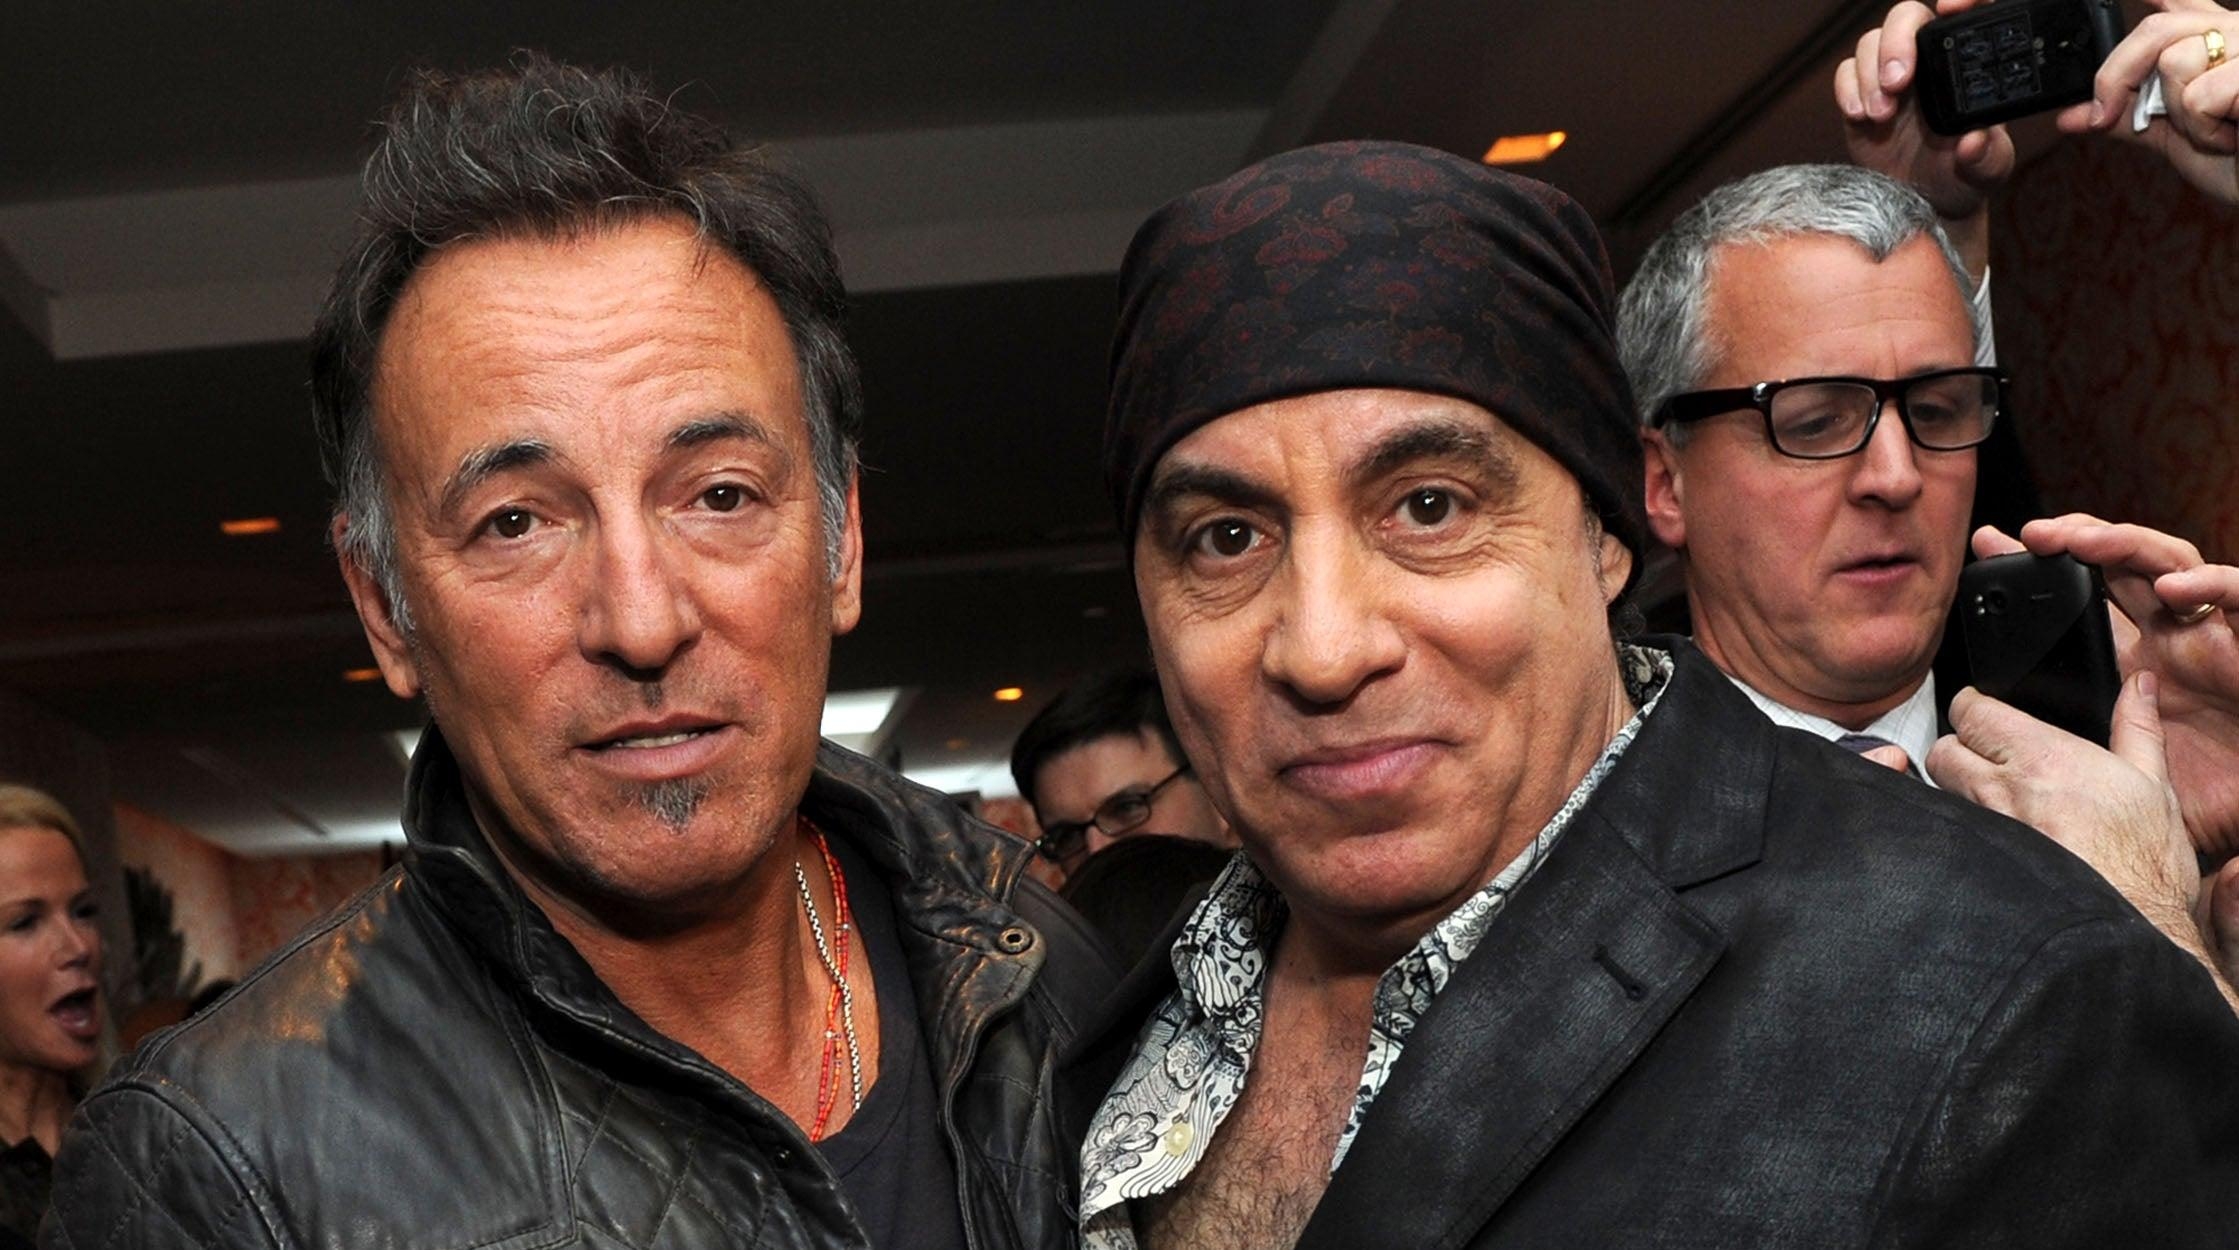 Steven Van Zandt based Silvio Dante’s relationship with Tony Soprano on his own friendship with Bruce Springsteen